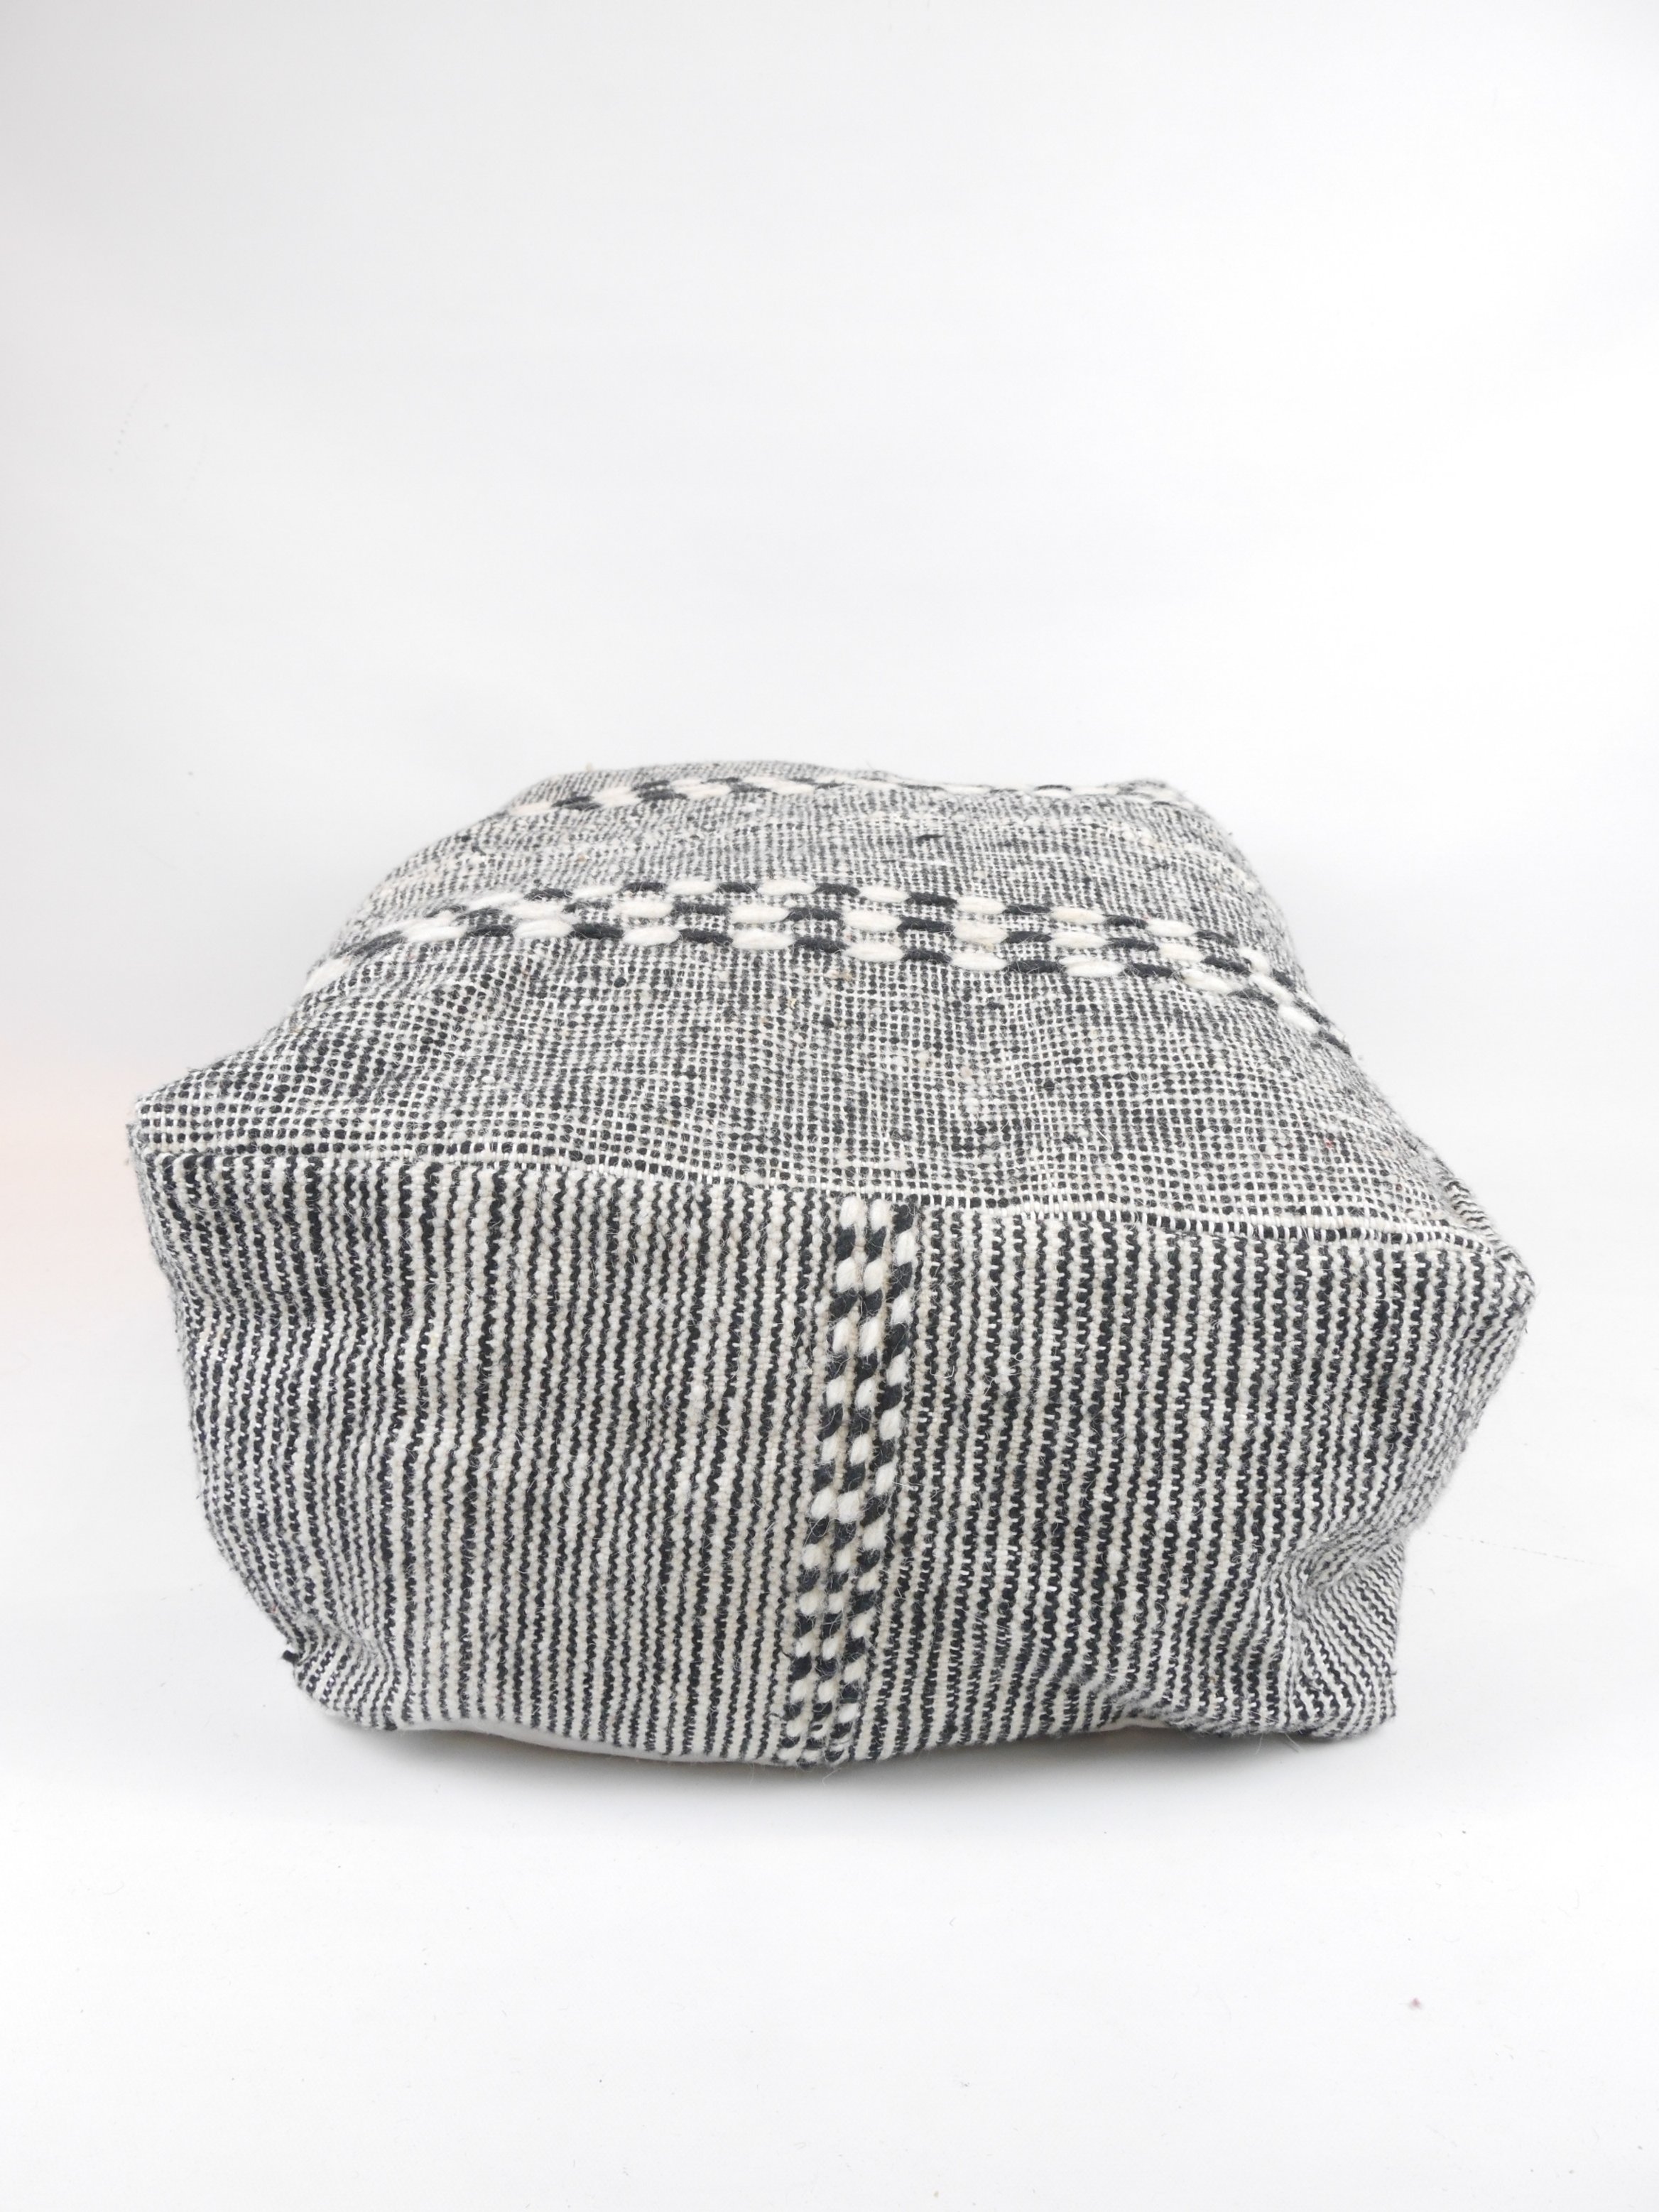 Shop Authentic Moroccan Handmade Poufs — LKT Rugs, Cushions and Poufs.